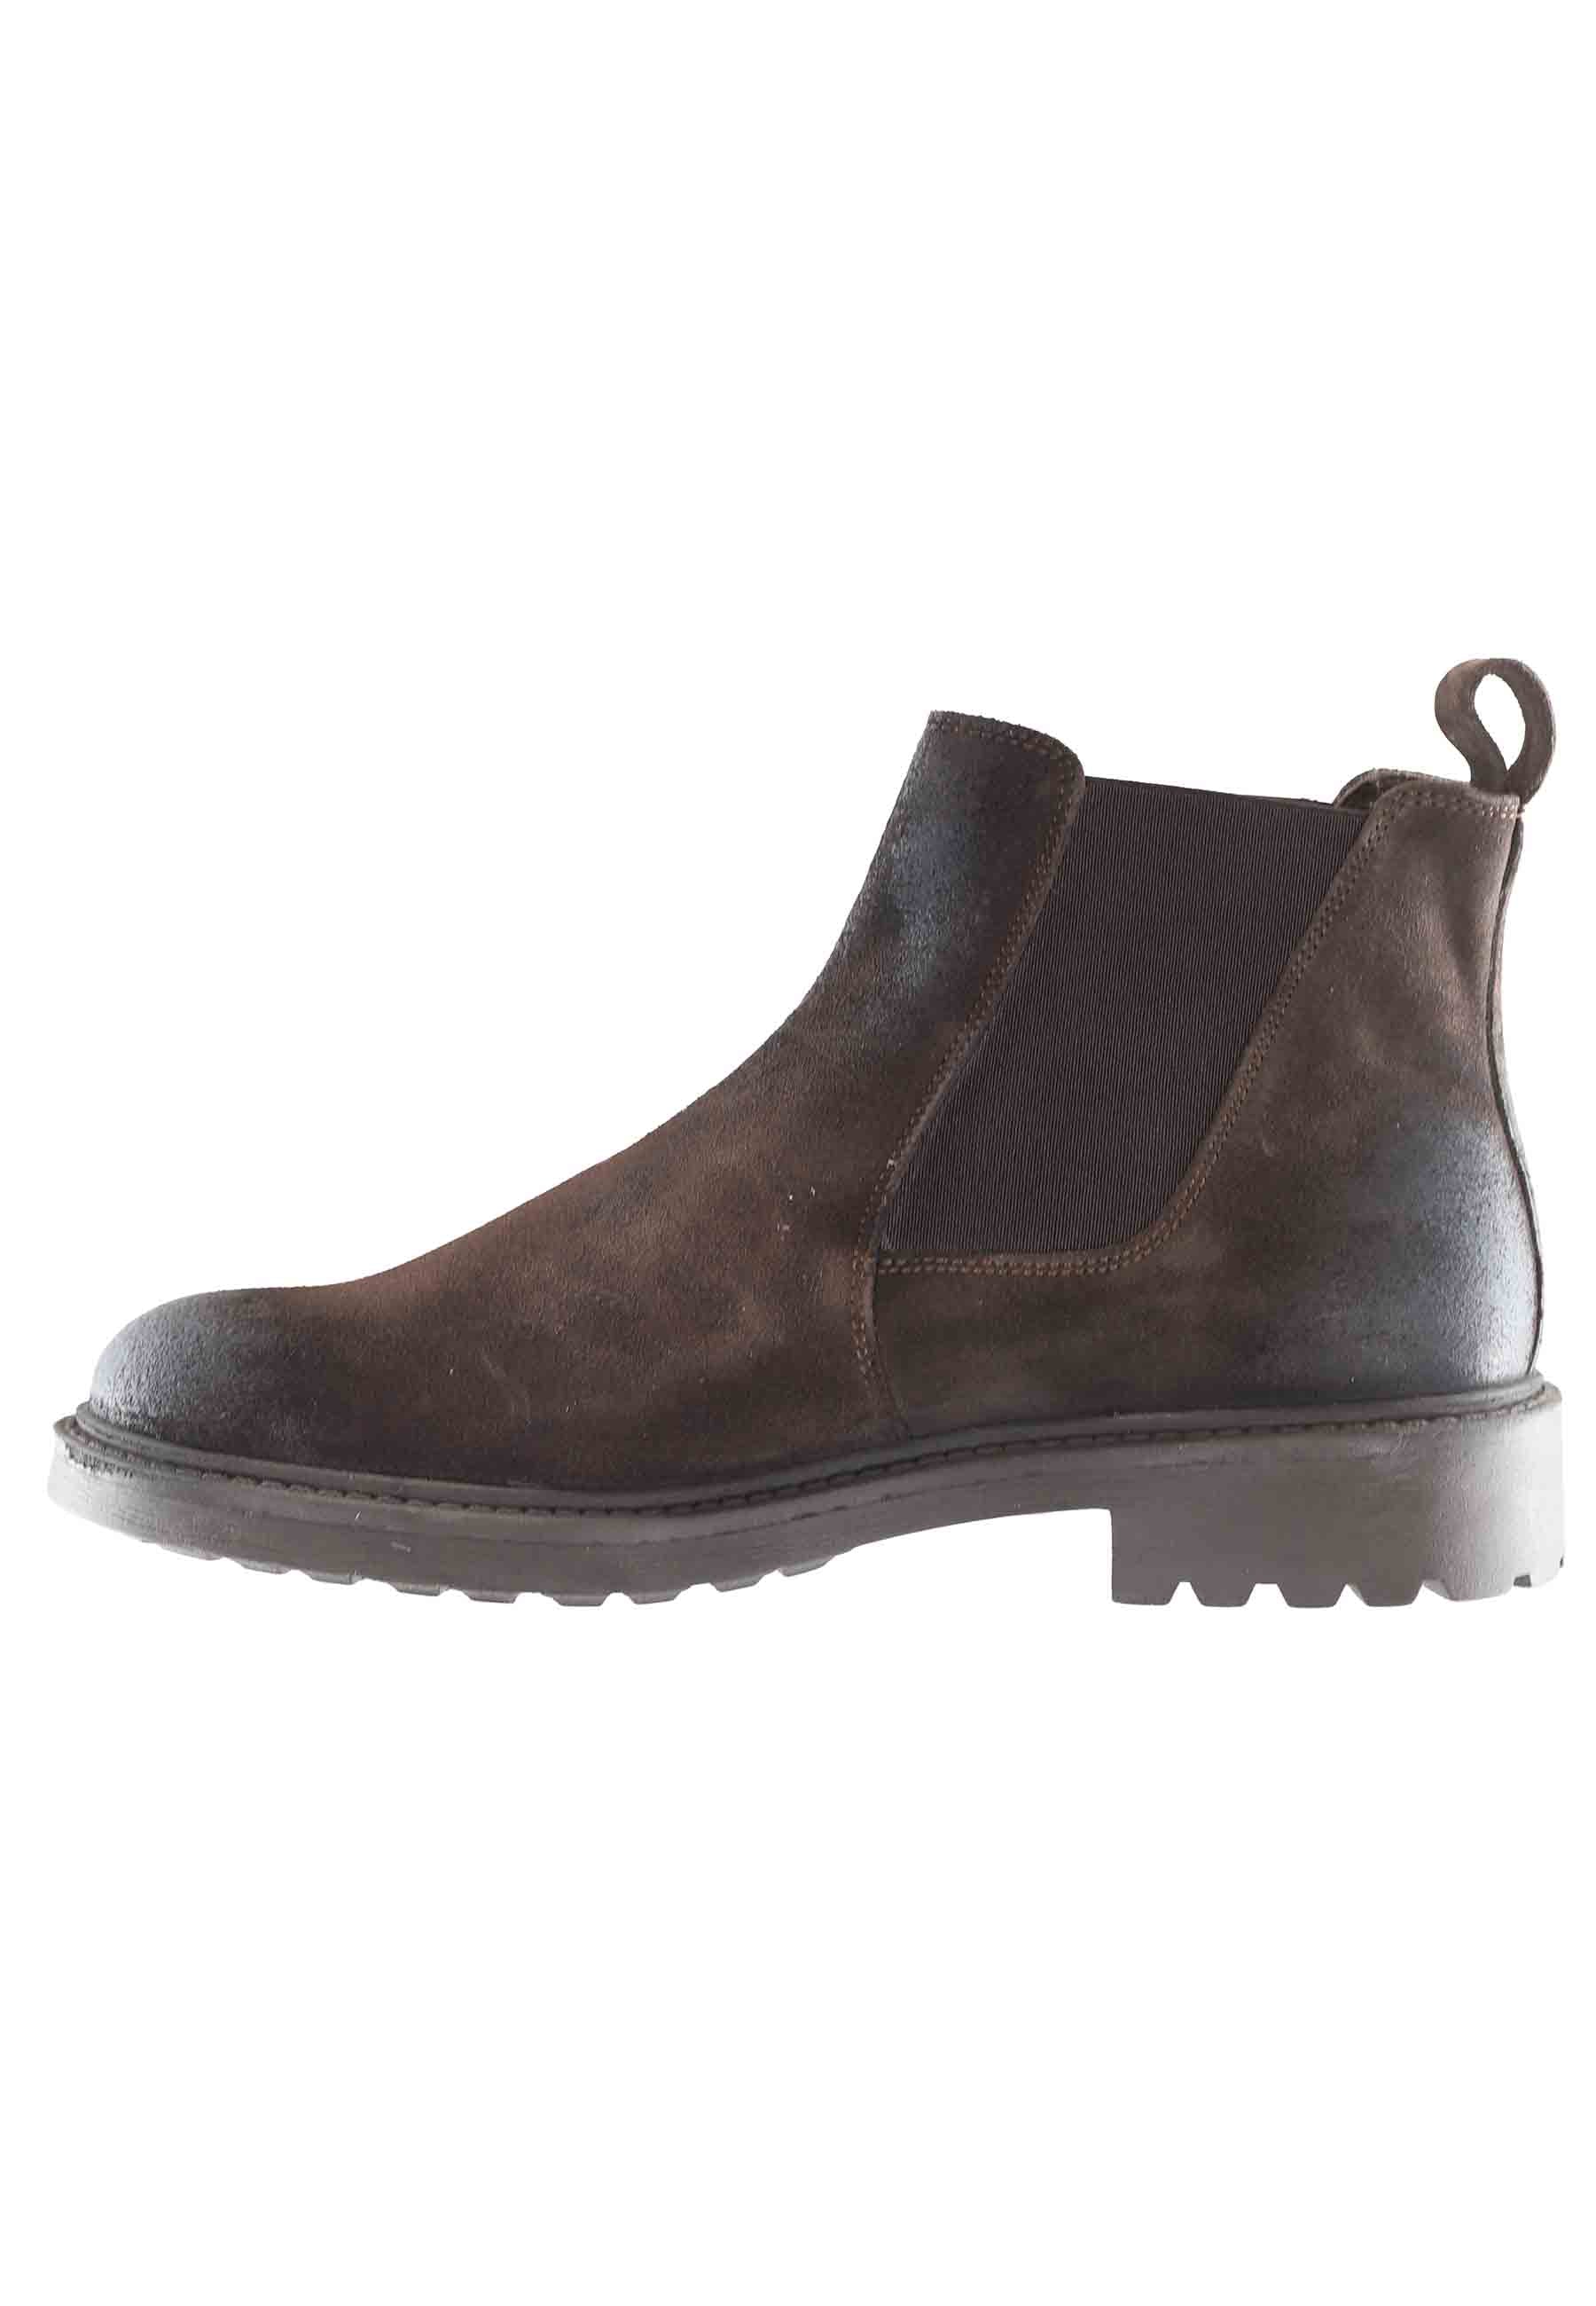 Men's chelsea boot in dark brown suede with lug sole